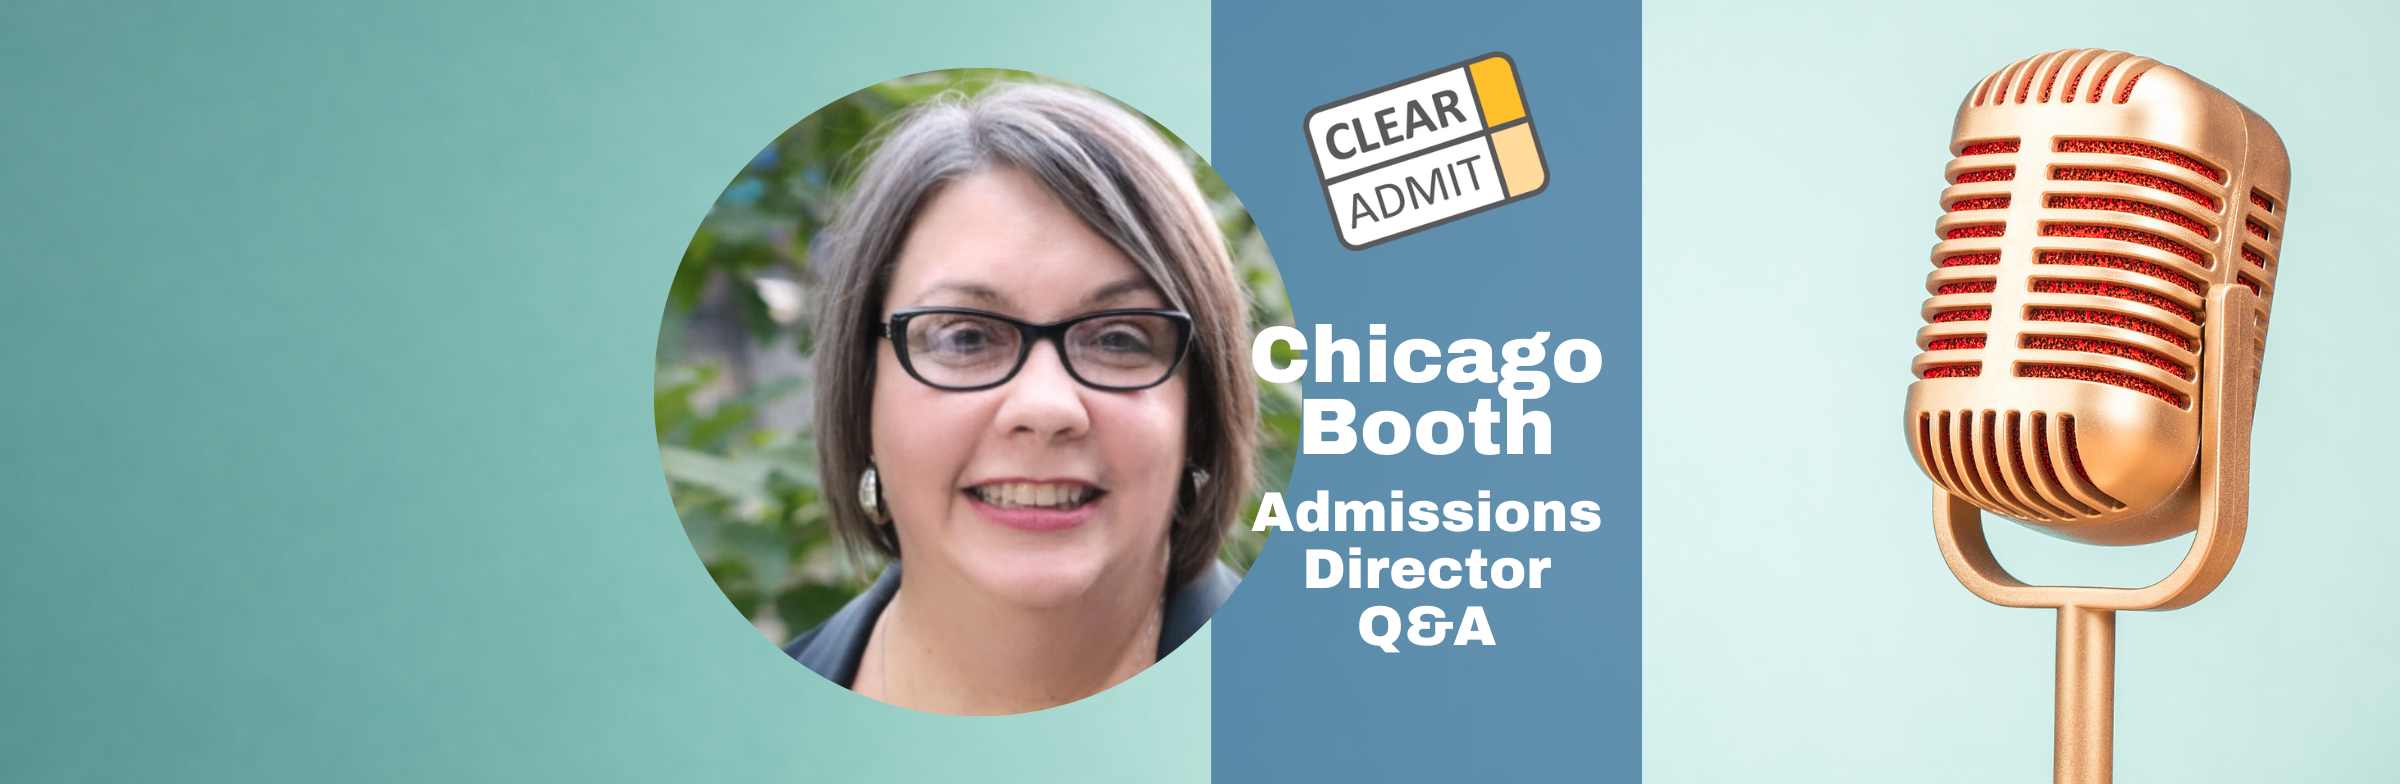 Image for Admissions Director Q&A: Donna Swinford of Chicago Booth